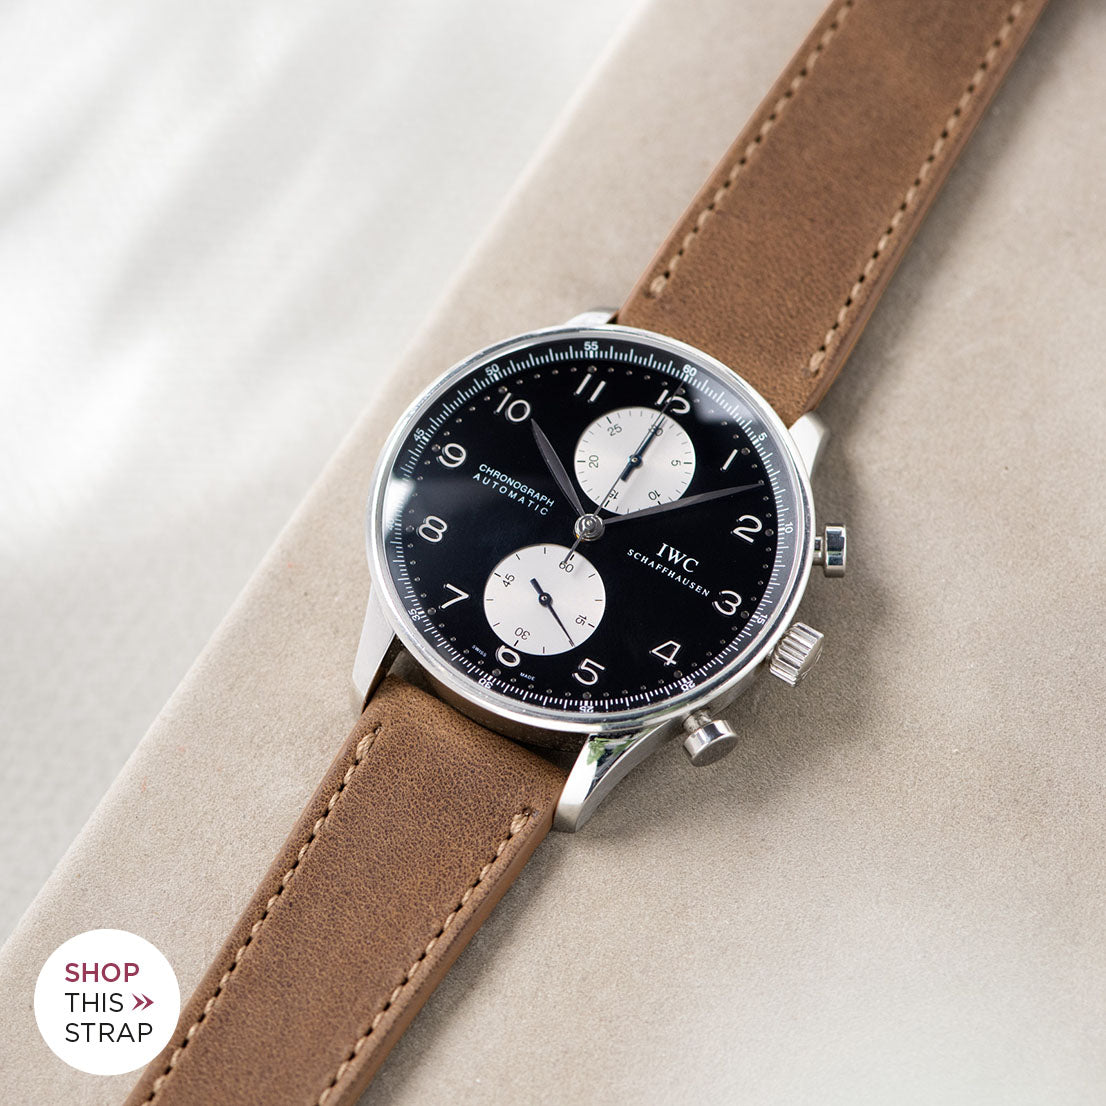 Bulang and Sons_Strap Guide_IWC-Portugieser_Cinnamon Brown Leather Watch Strap